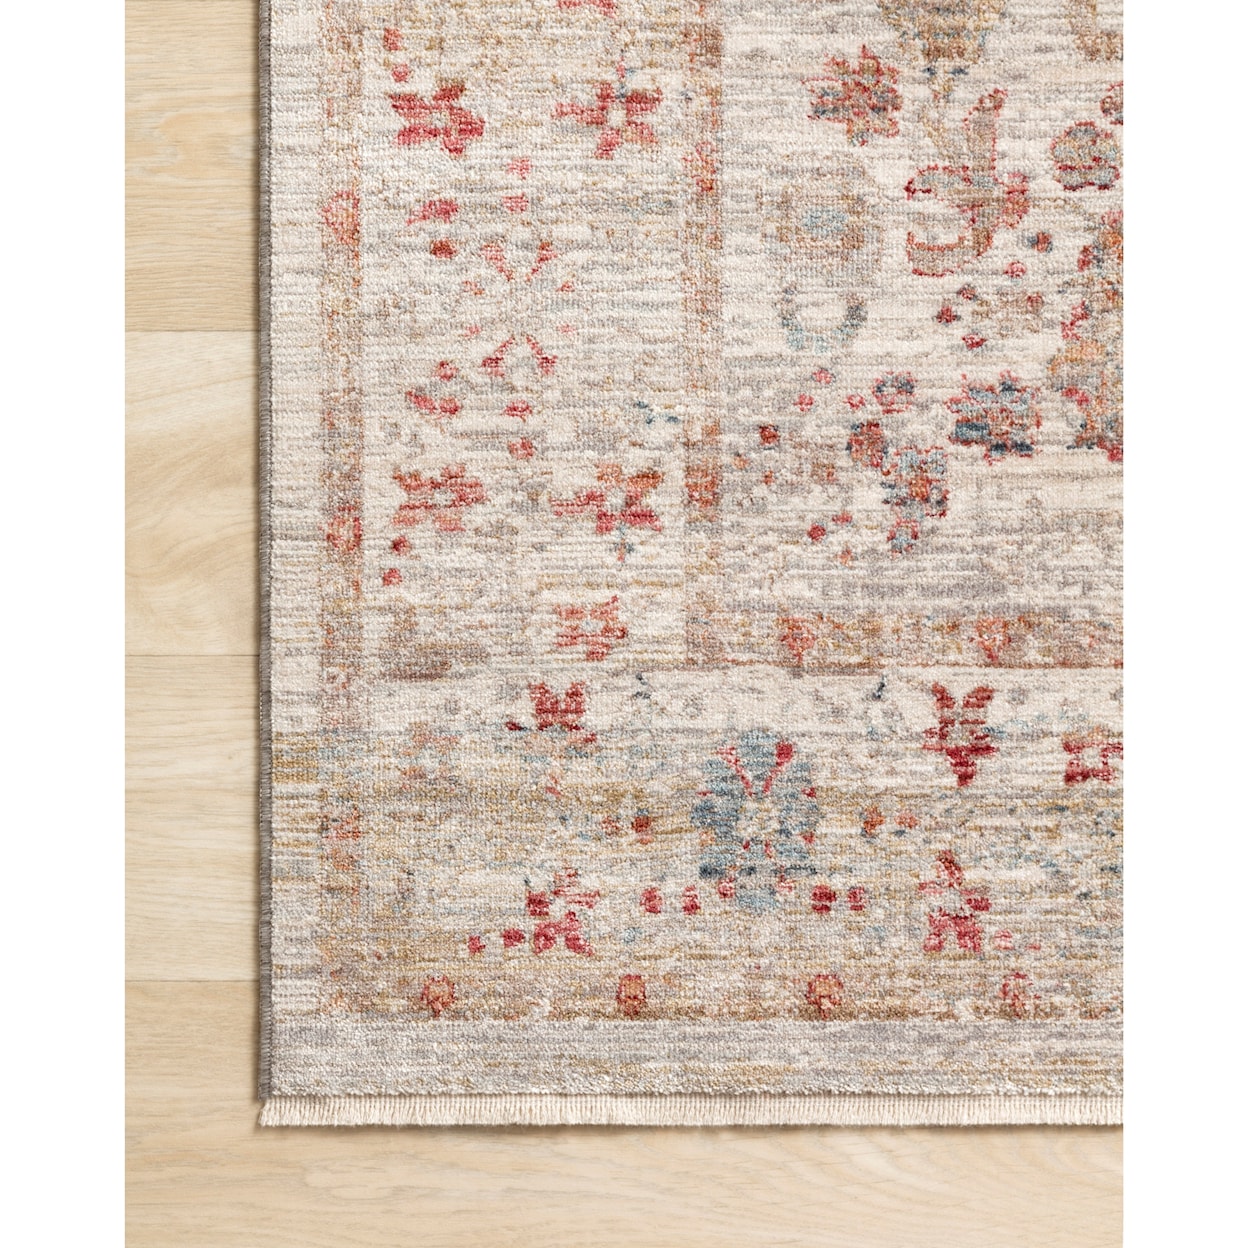 Loloi Rugs Claire 1'6" x 1'6"  Ivory / Multi Rug